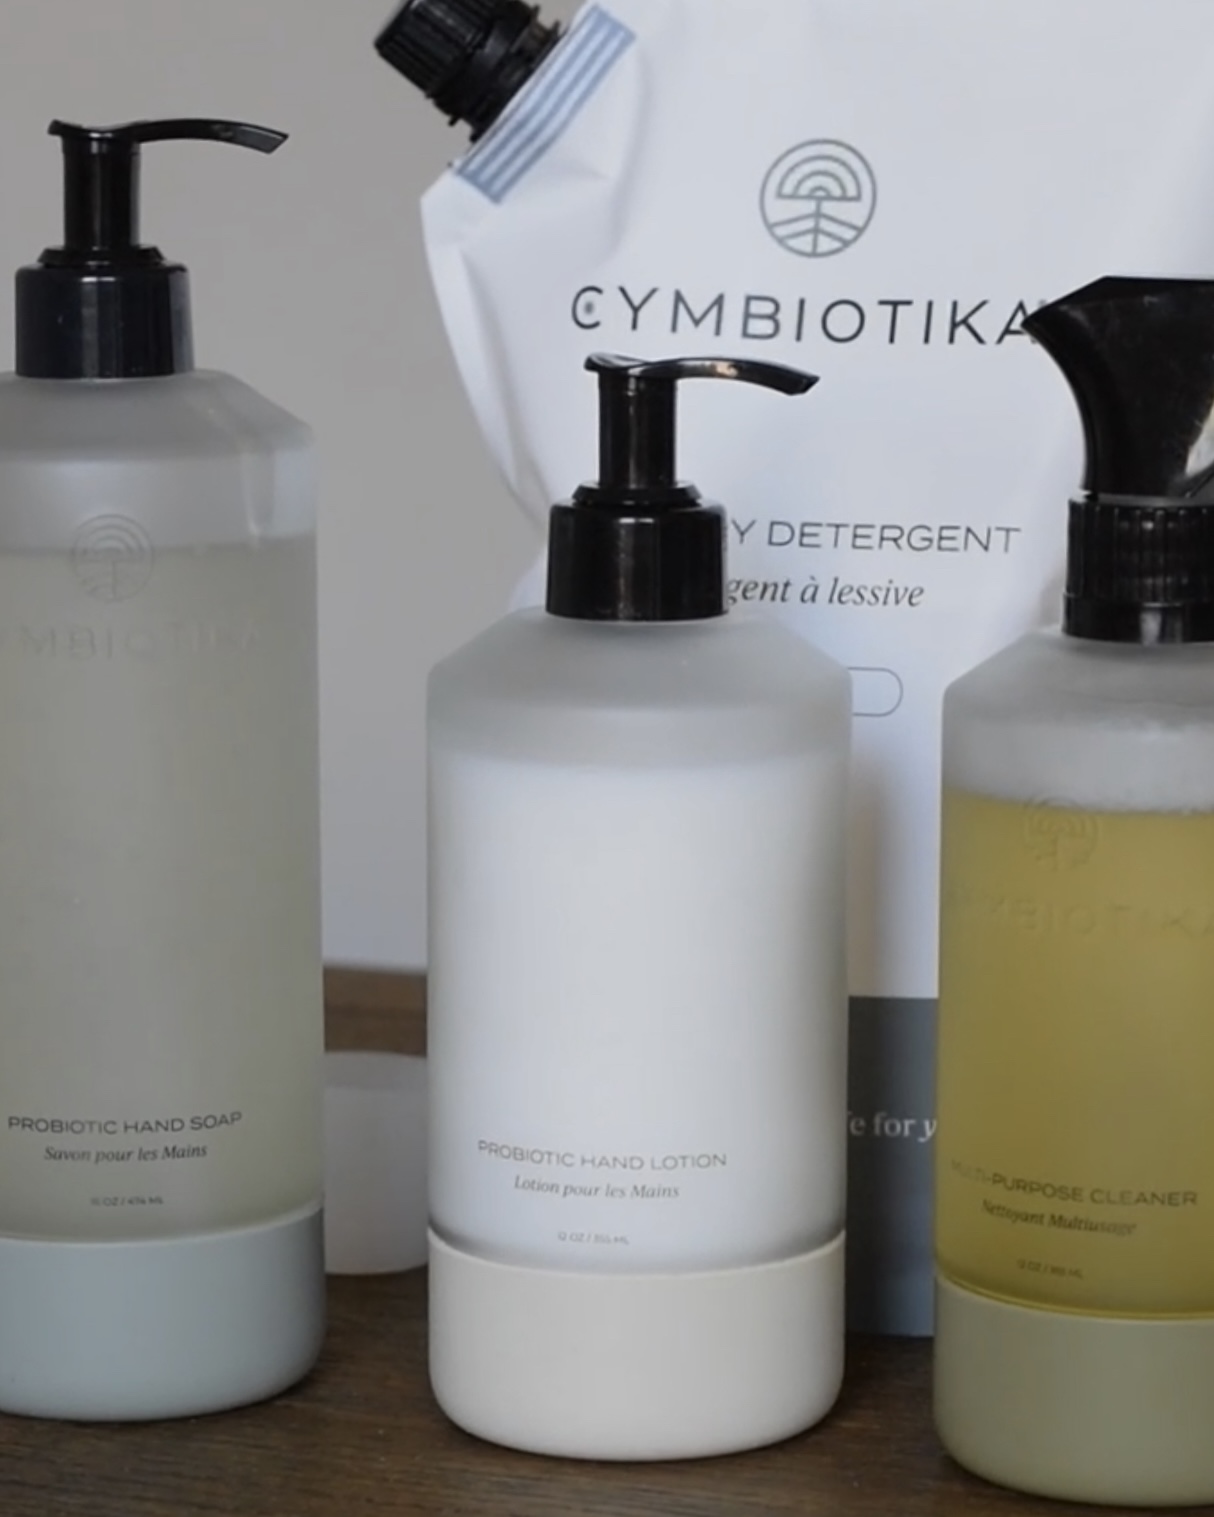 Cymbiotika Natural Home Essentials Kit Review | The Hive